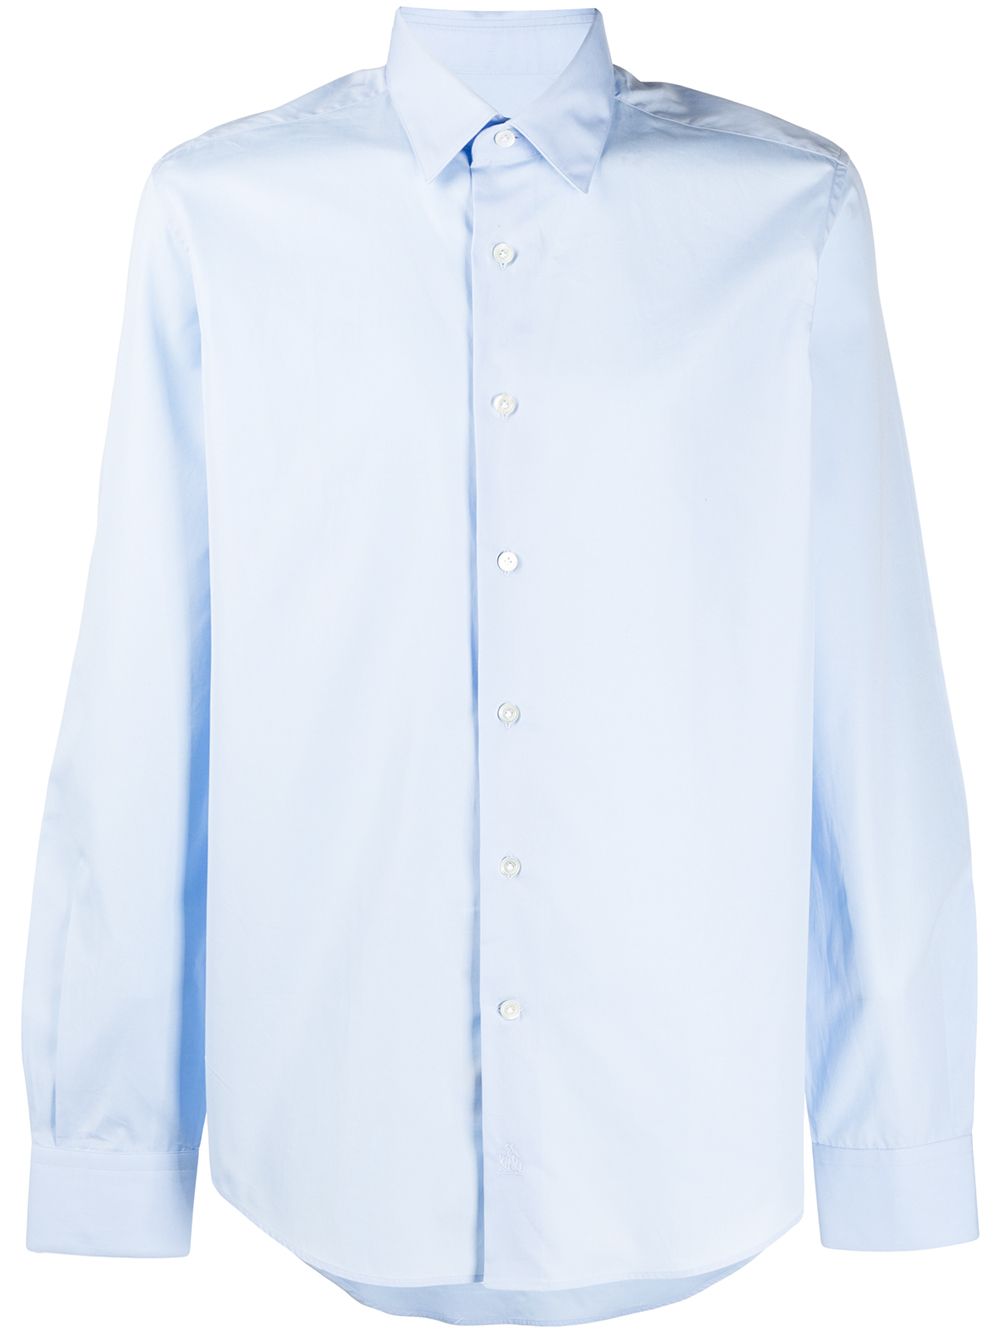 Lanvin relaxed-fit Cotton Shirt - Farfetch